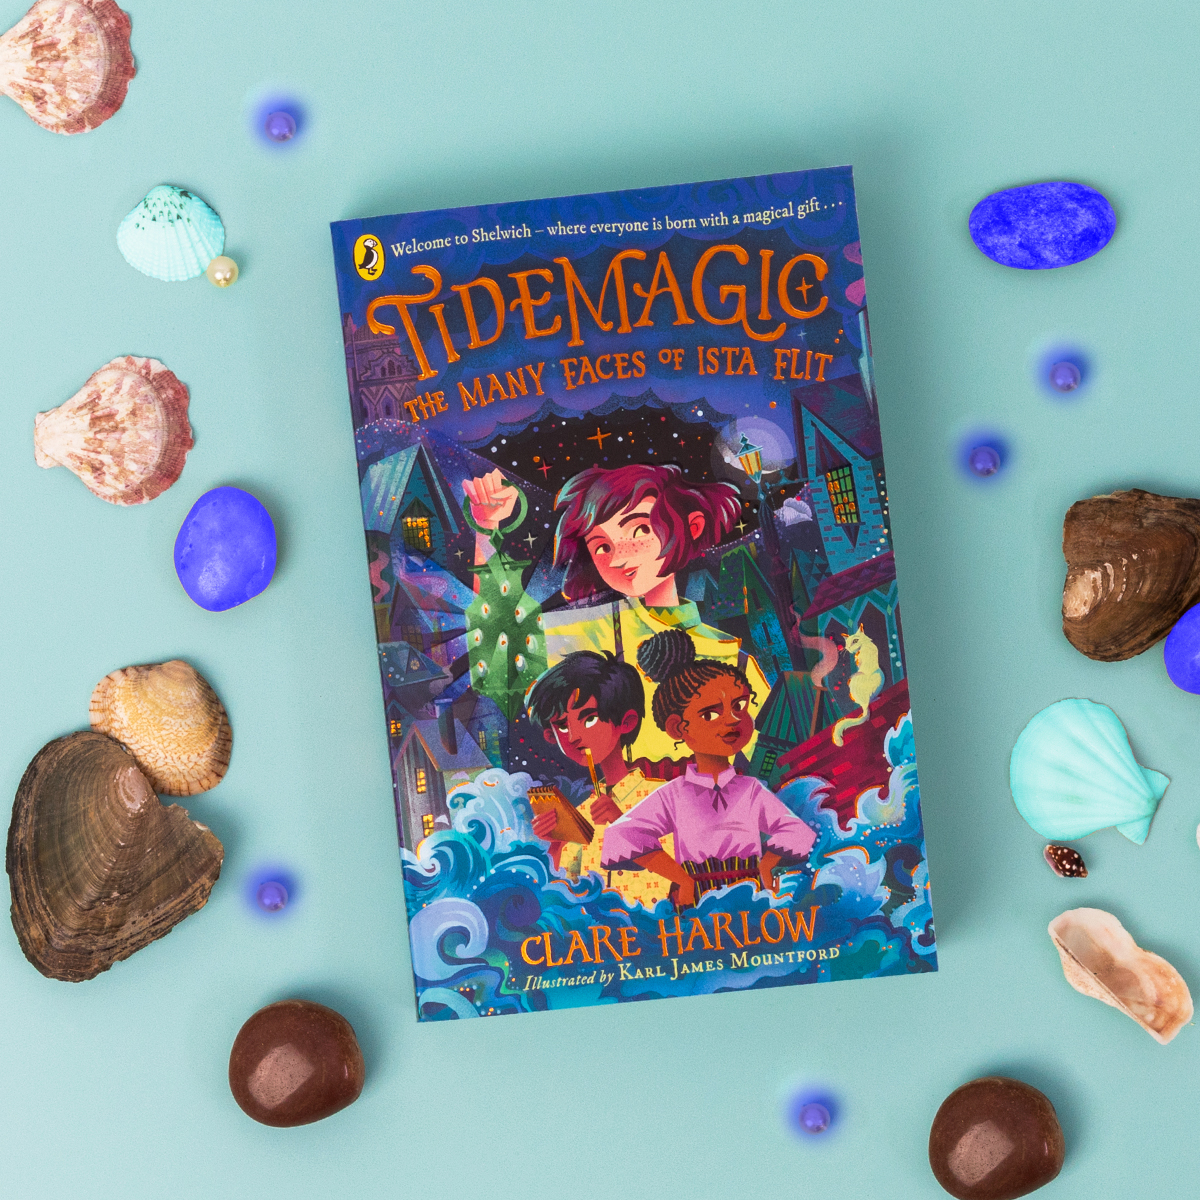 Still can't quite believe that Tidemagic is @blackwellbooks Children's Book of the Month for May. Here's a Q&A I did with junior bookseller Darcey, talking about Ista, Shelwich, and loads of other book related stuff ☺️ youtube.com/watch?v=df3uZu…